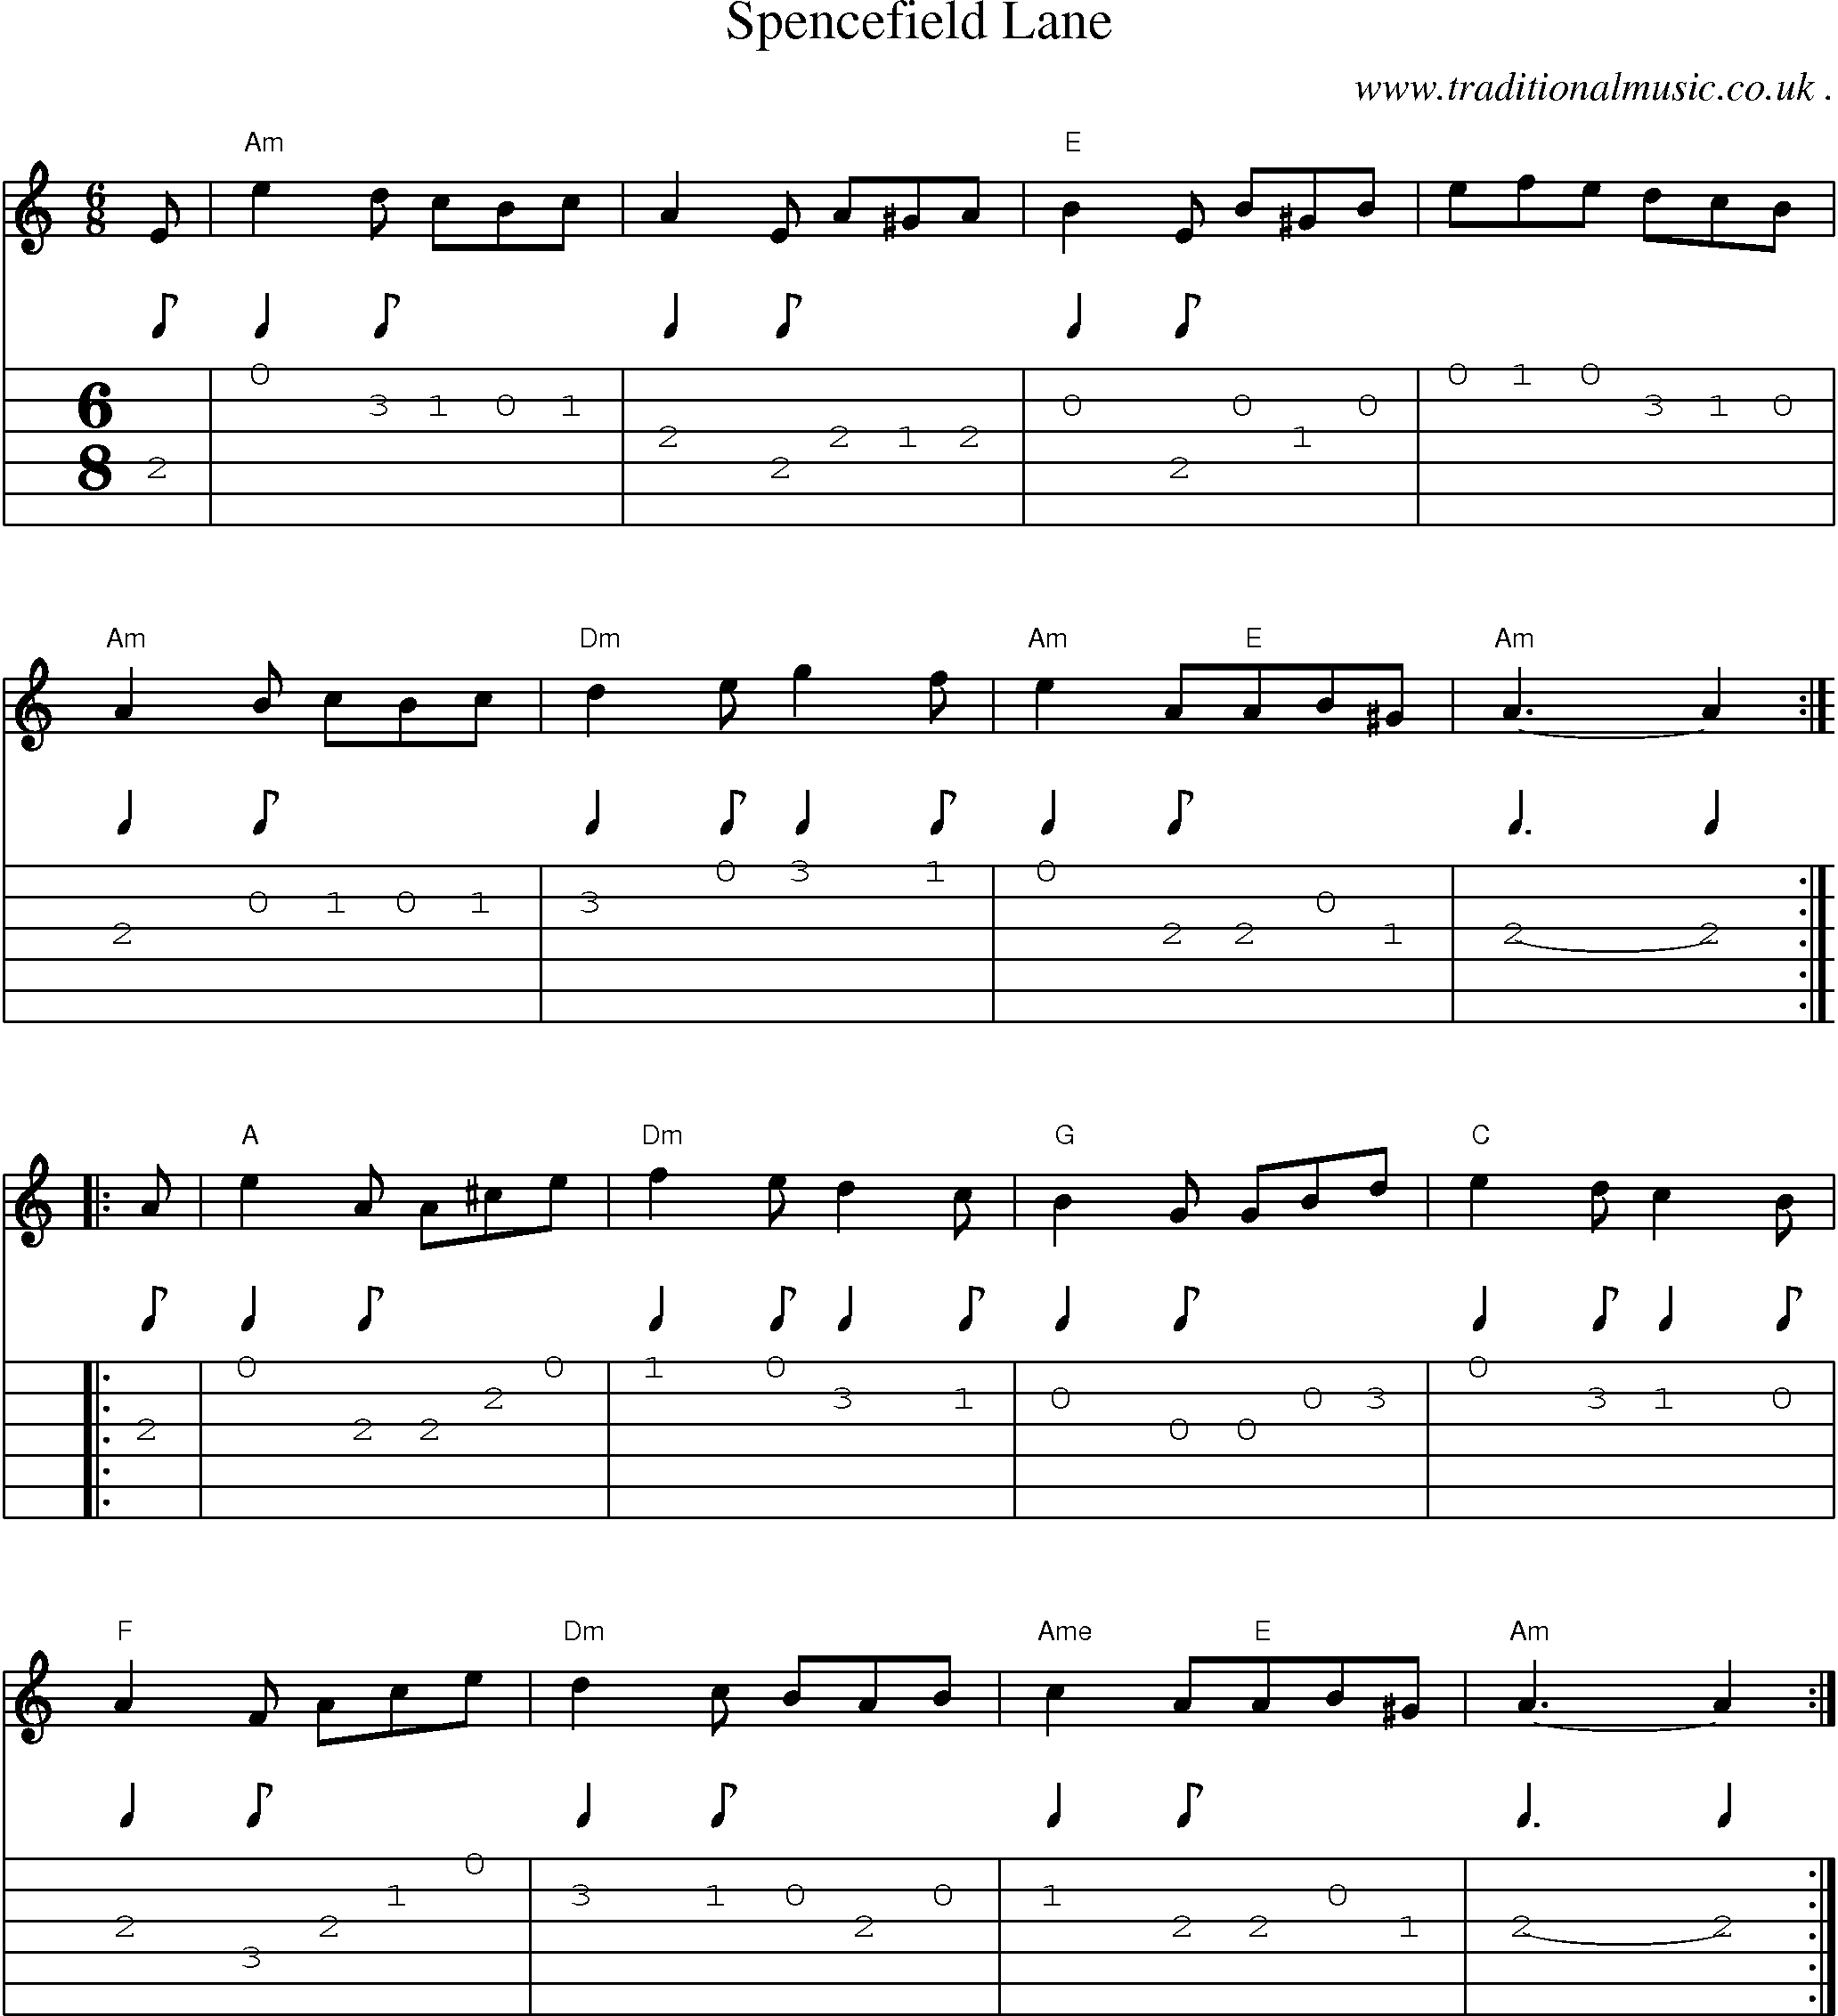 Sheet-Music and Guitar Tabs for Spencefield Lane